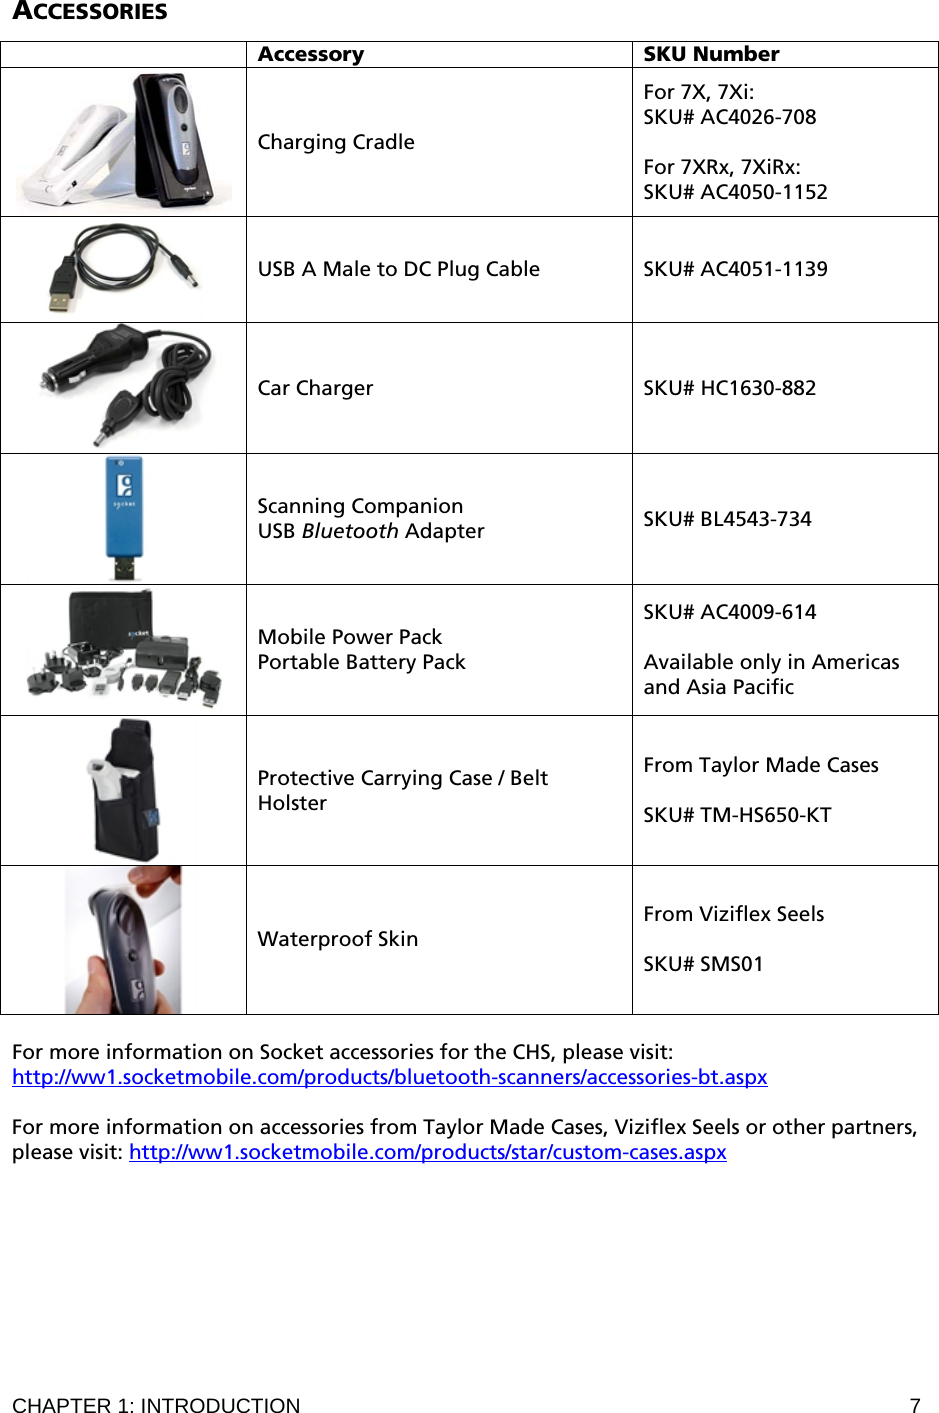 CHAPTER 1: INTRODUCTION  7 ACCESSORIES   Accessory SKU Number  Charging Cradle For 7X, 7Xi:  SKU# AC4026-708  For 7XRx, 7XiRx:  SKU# AC4050-1152  USB A Male to DC Plug Cable  SKU# AC4051-1139  Car Charger  SKU# HC1630-882  Scanning Companion USB Bluetooth Adapter  SKU# BL4543-734  Mobile Power Pack Portable Battery Pack SKU# AC4009-614  Available only in Americas and Asia Pacific  Protective Carrying Case / Belt Holster From Taylor Made Cases  SKU# TM-HS650-KT  Waterproof Skin From Viziflex Seels  SKU# SMS01  For more information on Socket accessories for the CHS, please visit: http://ww1.socketmobile.com/products/bluetooth-scanners/accessories-bt.aspx  For more information on accessories from Taylor Made Cases, Viziflex Seels or other partners, please visit: http://ww1.socketmobile.com/products/star/custom-cases.aspx 